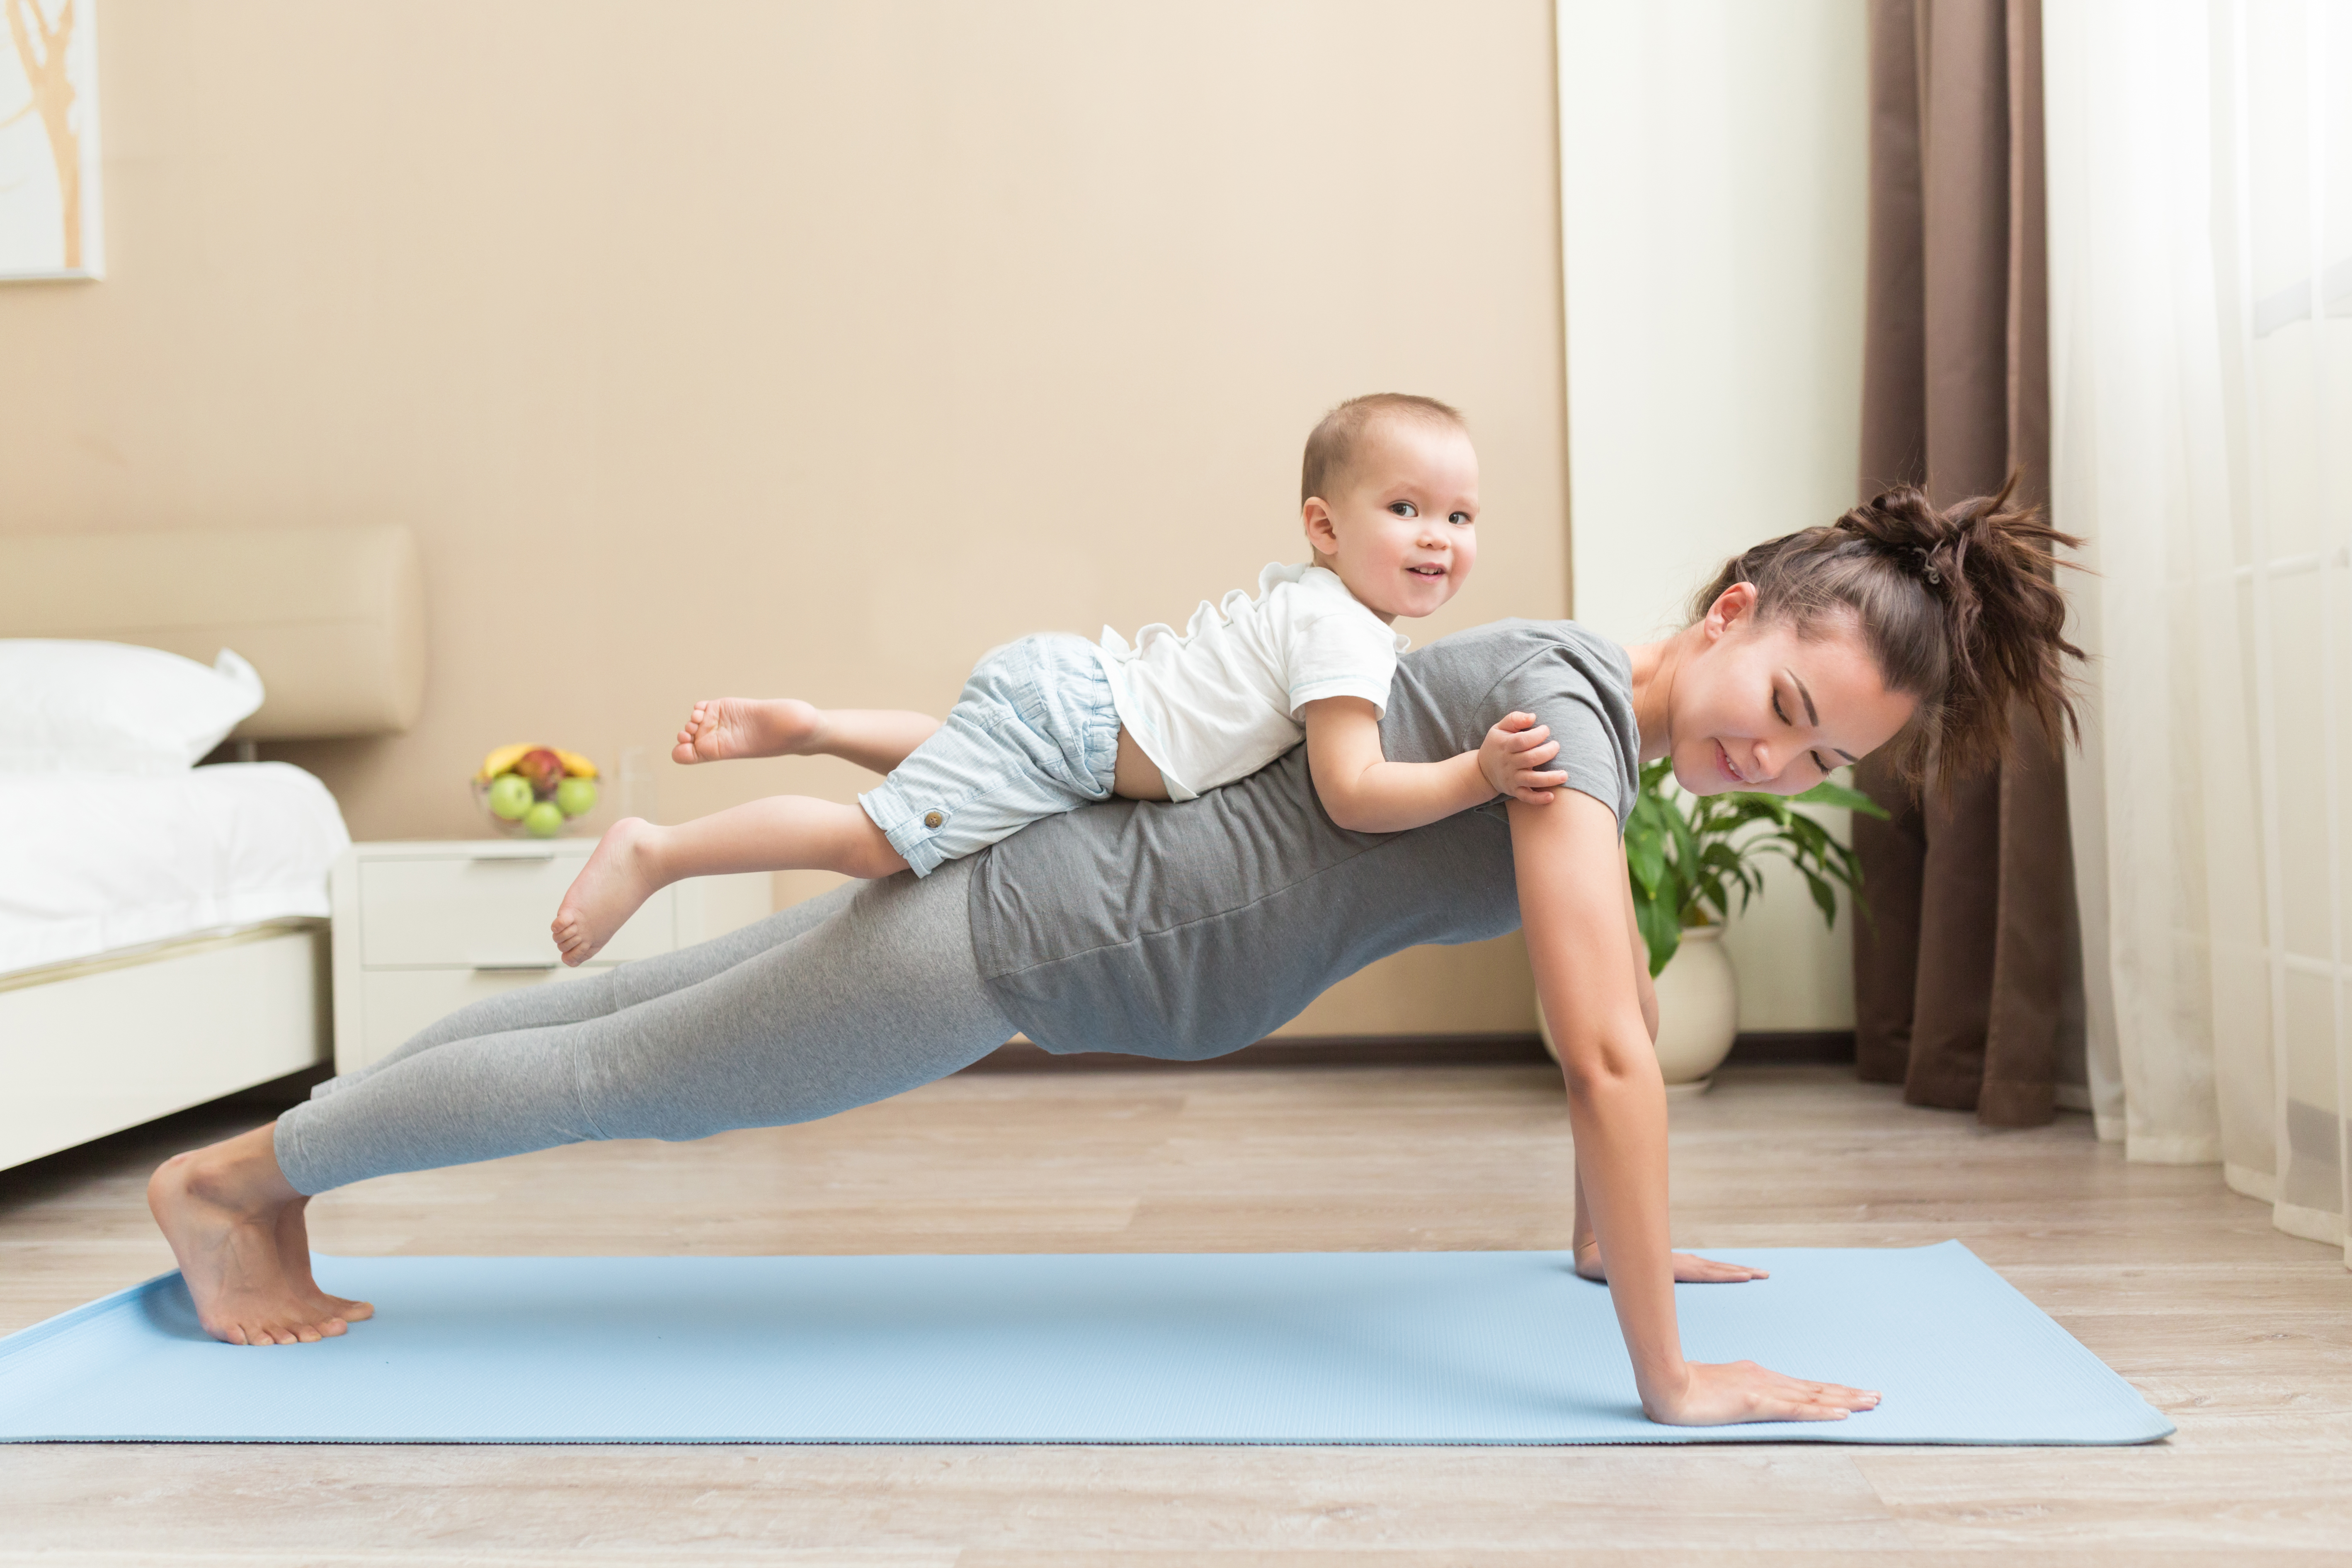 A woman exercising with her child on her back | Source: Shutterstock